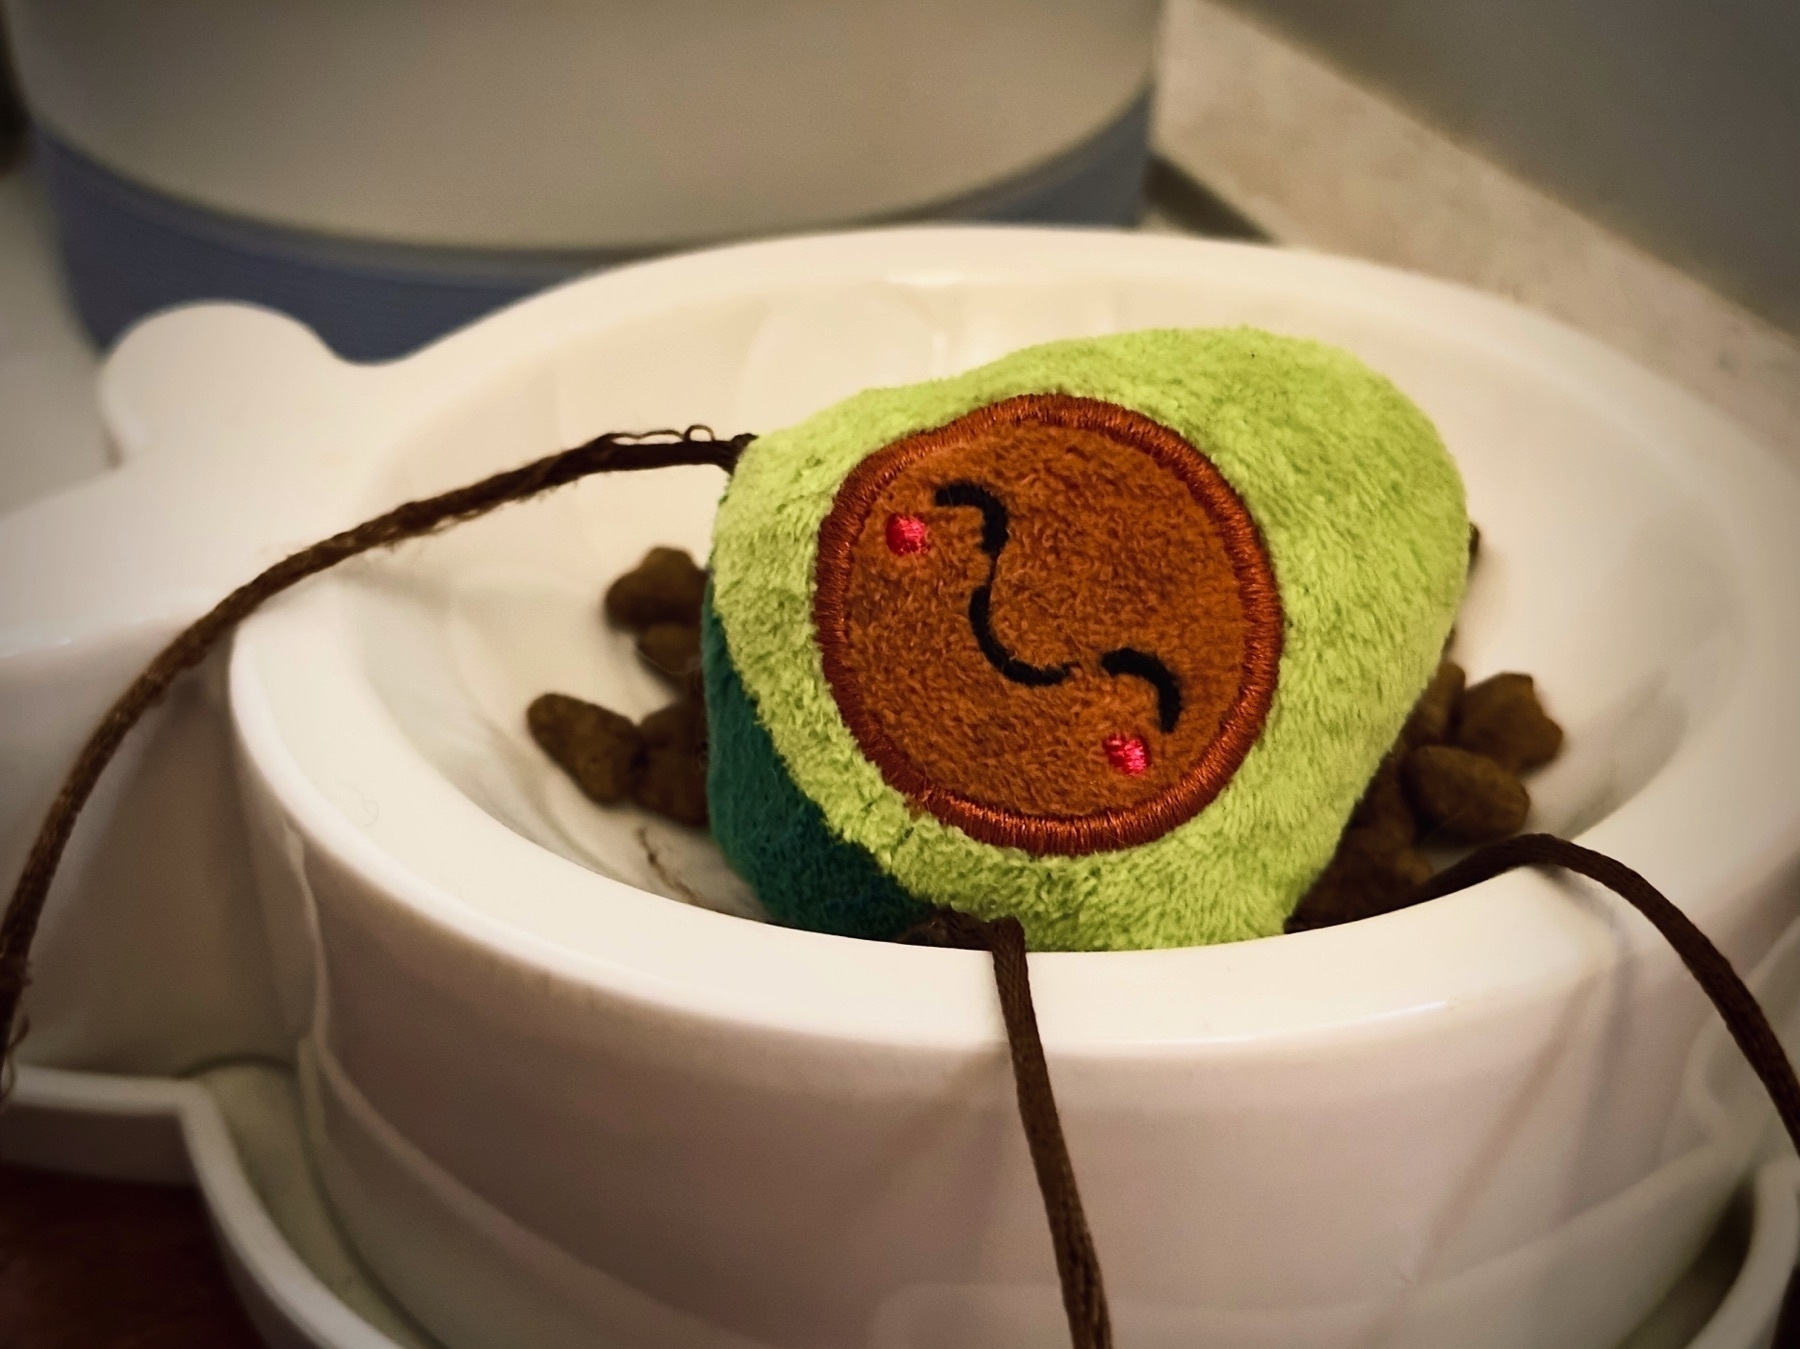 A small plush avocado smilie face resting in an cat’s empty bowl… a message of sorts.